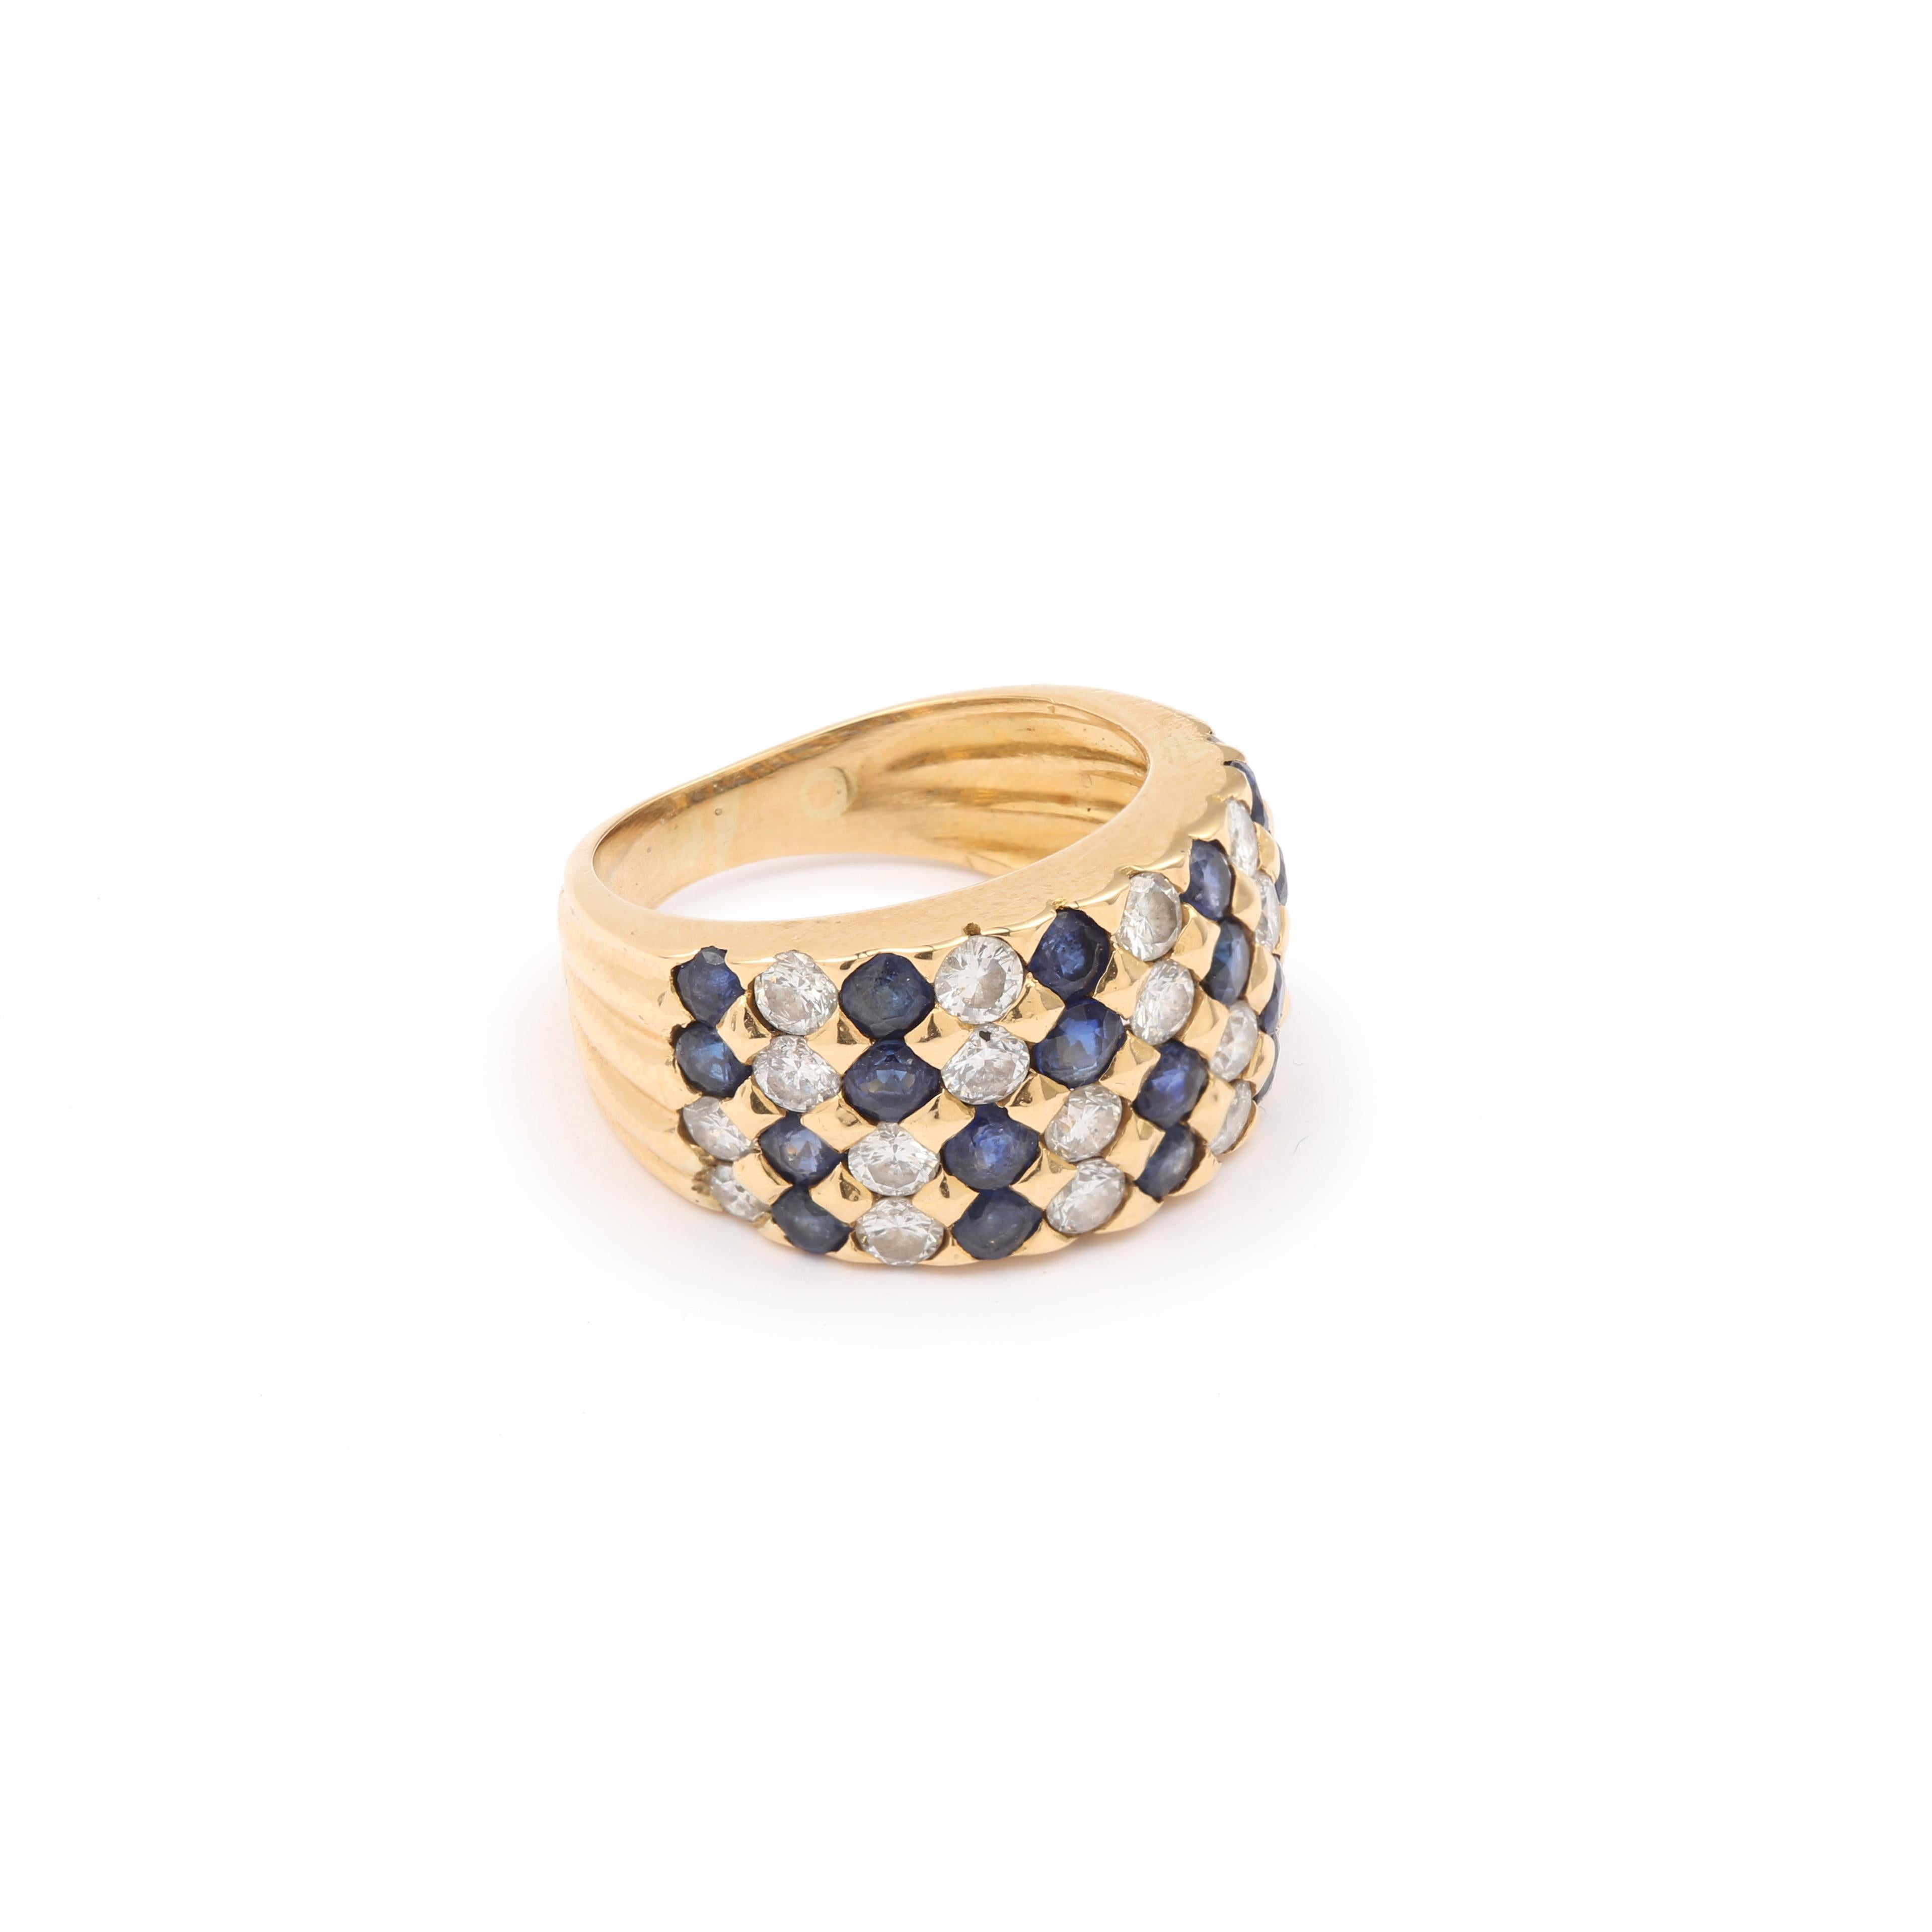 Yellow gold ring with gadroons featuring a checkerboard pattern of alternating brilliant diamonds and cushion sapphires.

Total estimated weight of diamonds : 0.80 carats

Total estimated weight of sapphires : 0.90 carats

Dimensions: 10.90 x 21.10